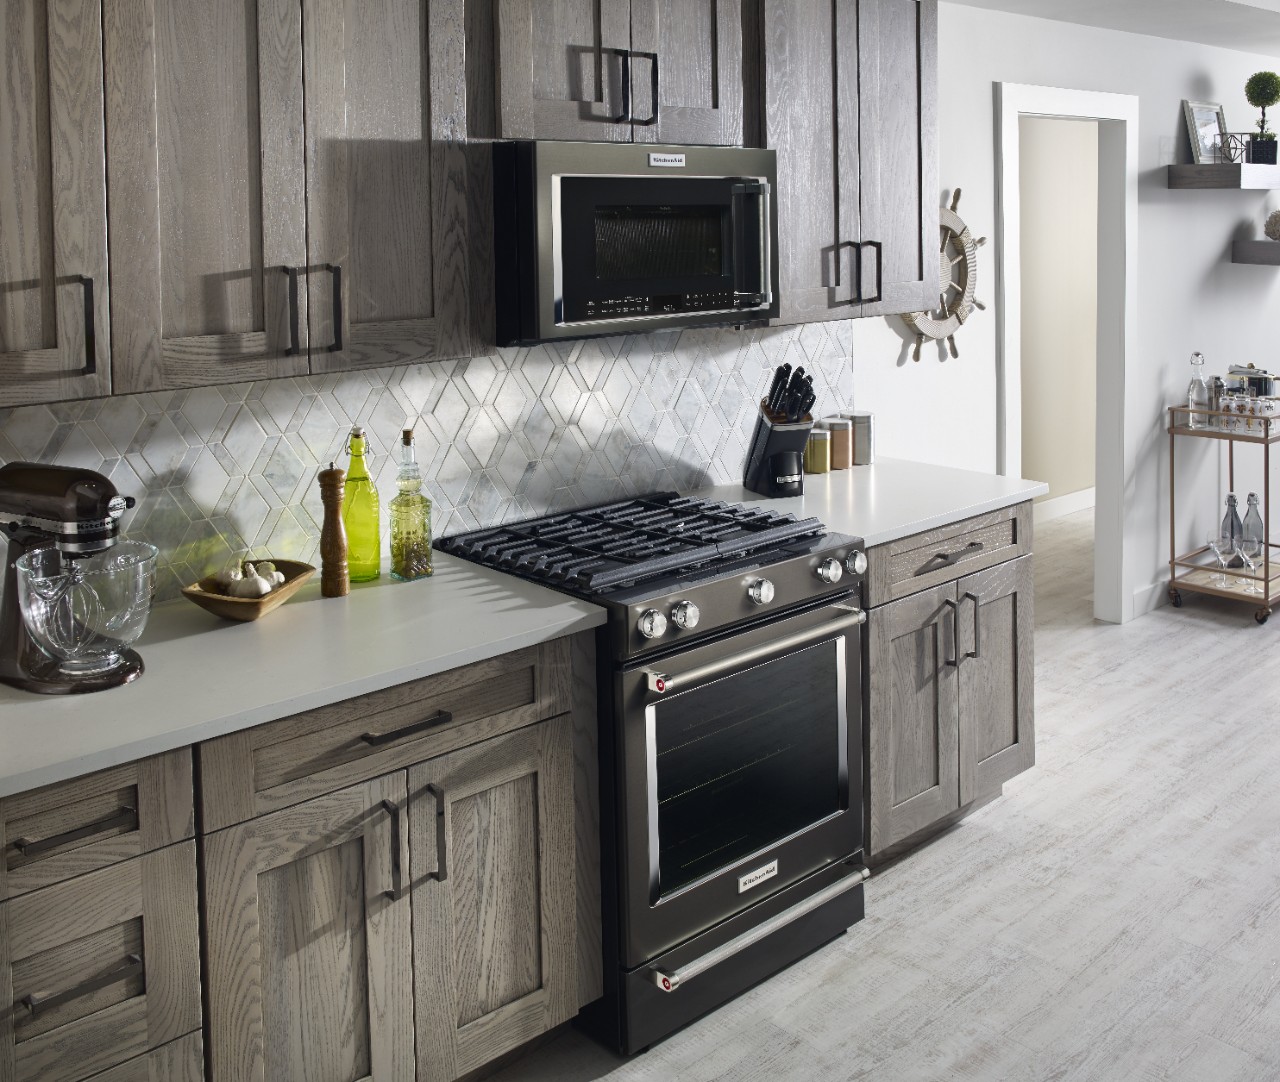 Save space with a KitchenAid® Microwave Hood Combination Oven